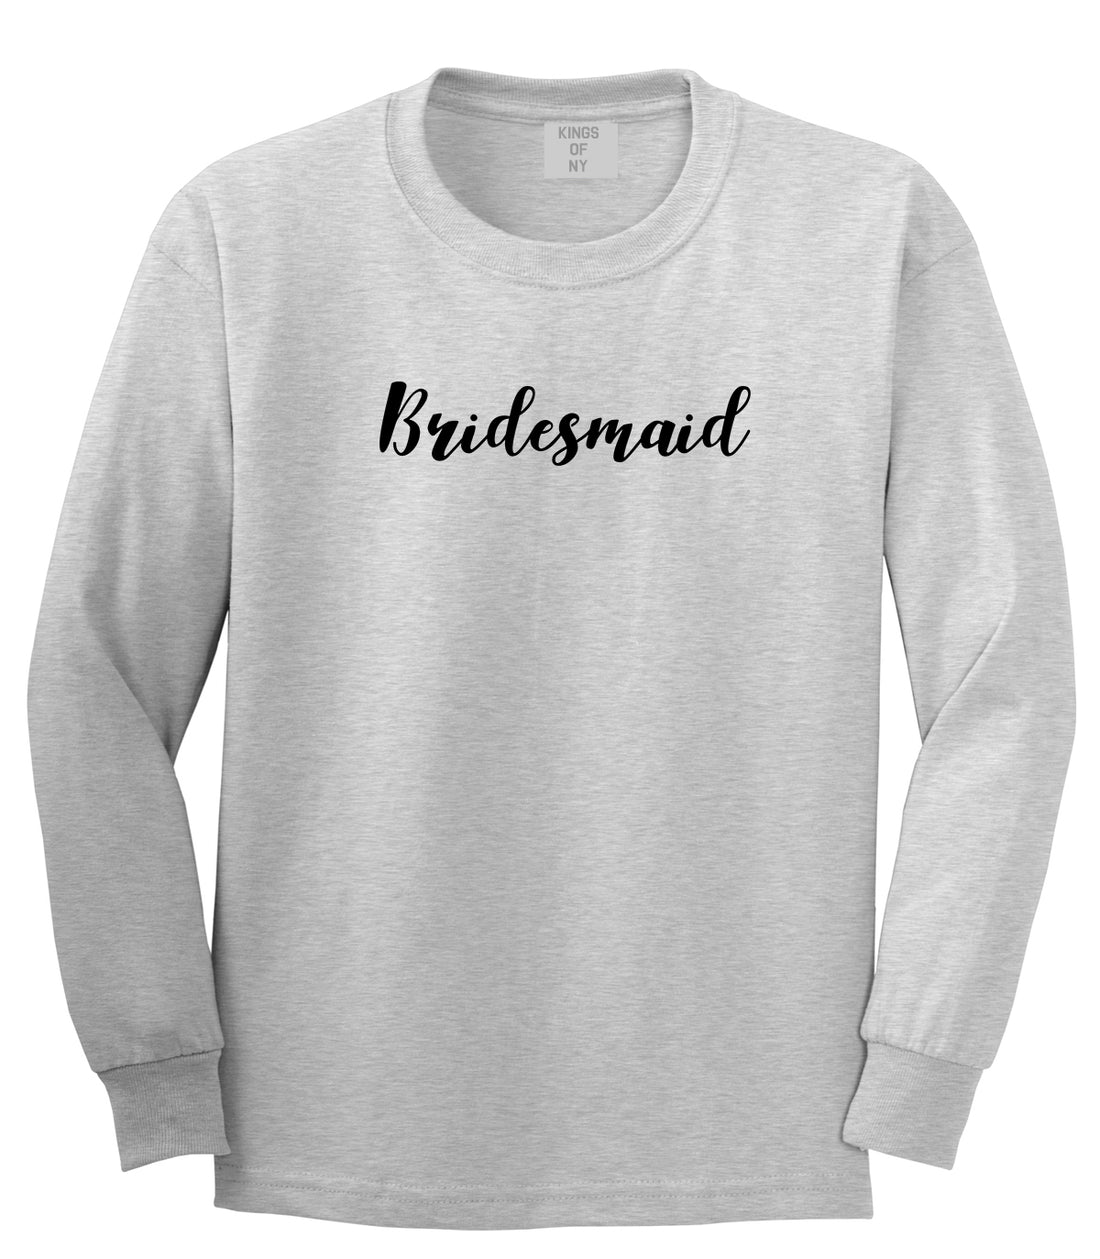 Bridesmaid Bachlorette Party Grey Long Sleeve T-Shirt by Kings Of NY